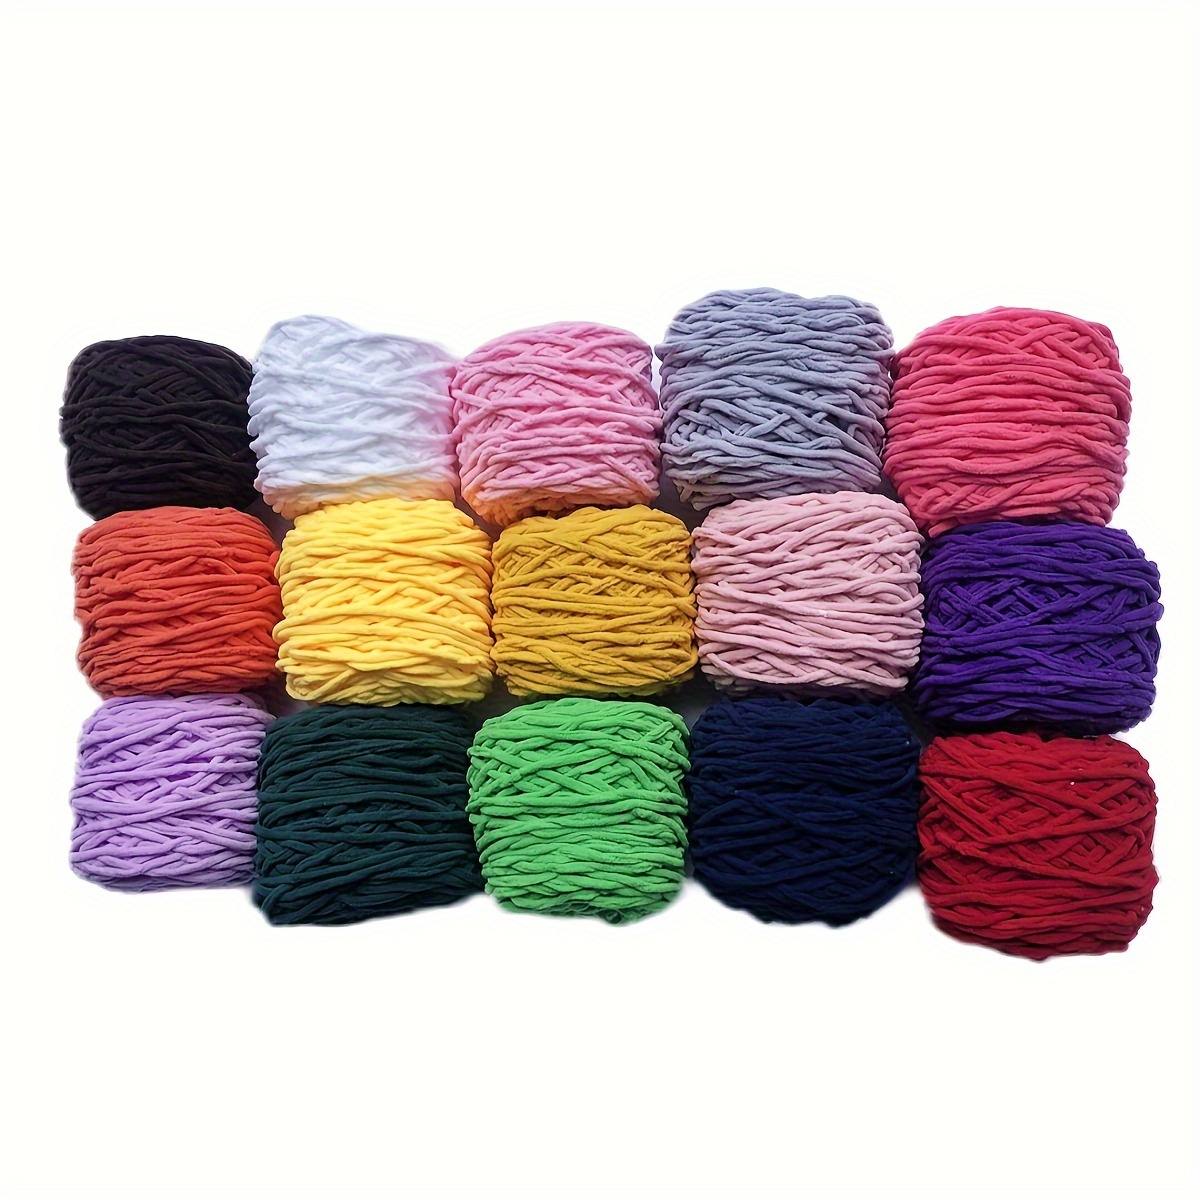 Knitting Yarn Chunky Thread Soft Thick Hand-woven Wool Scarves Shawls  Blanket US